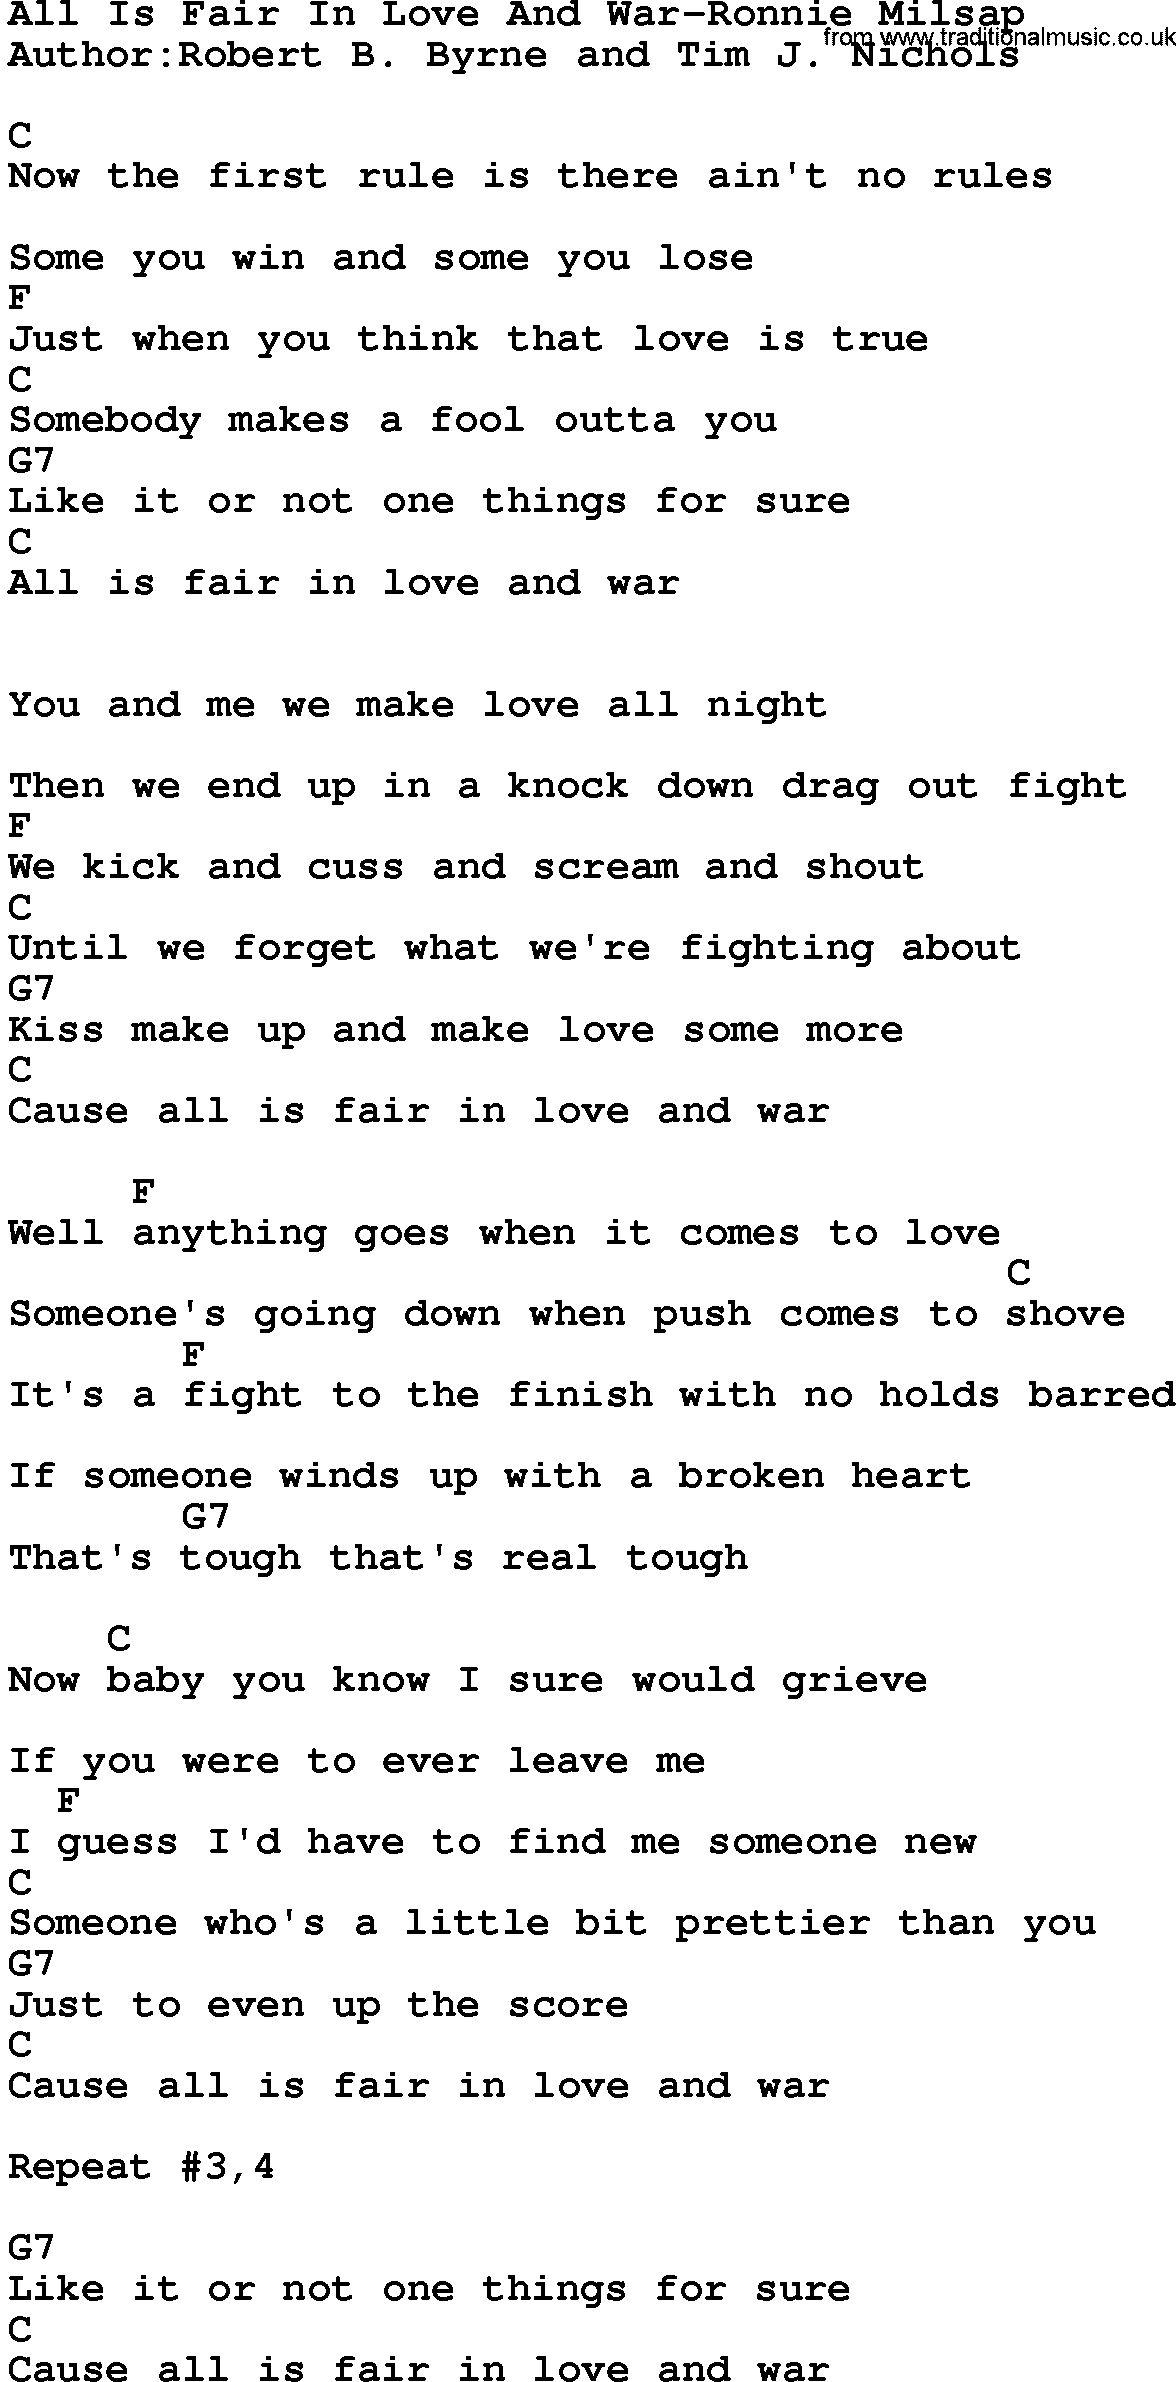 Country music song: All Is Fair In Love And War-Ronnie Milsap lyrics and chords